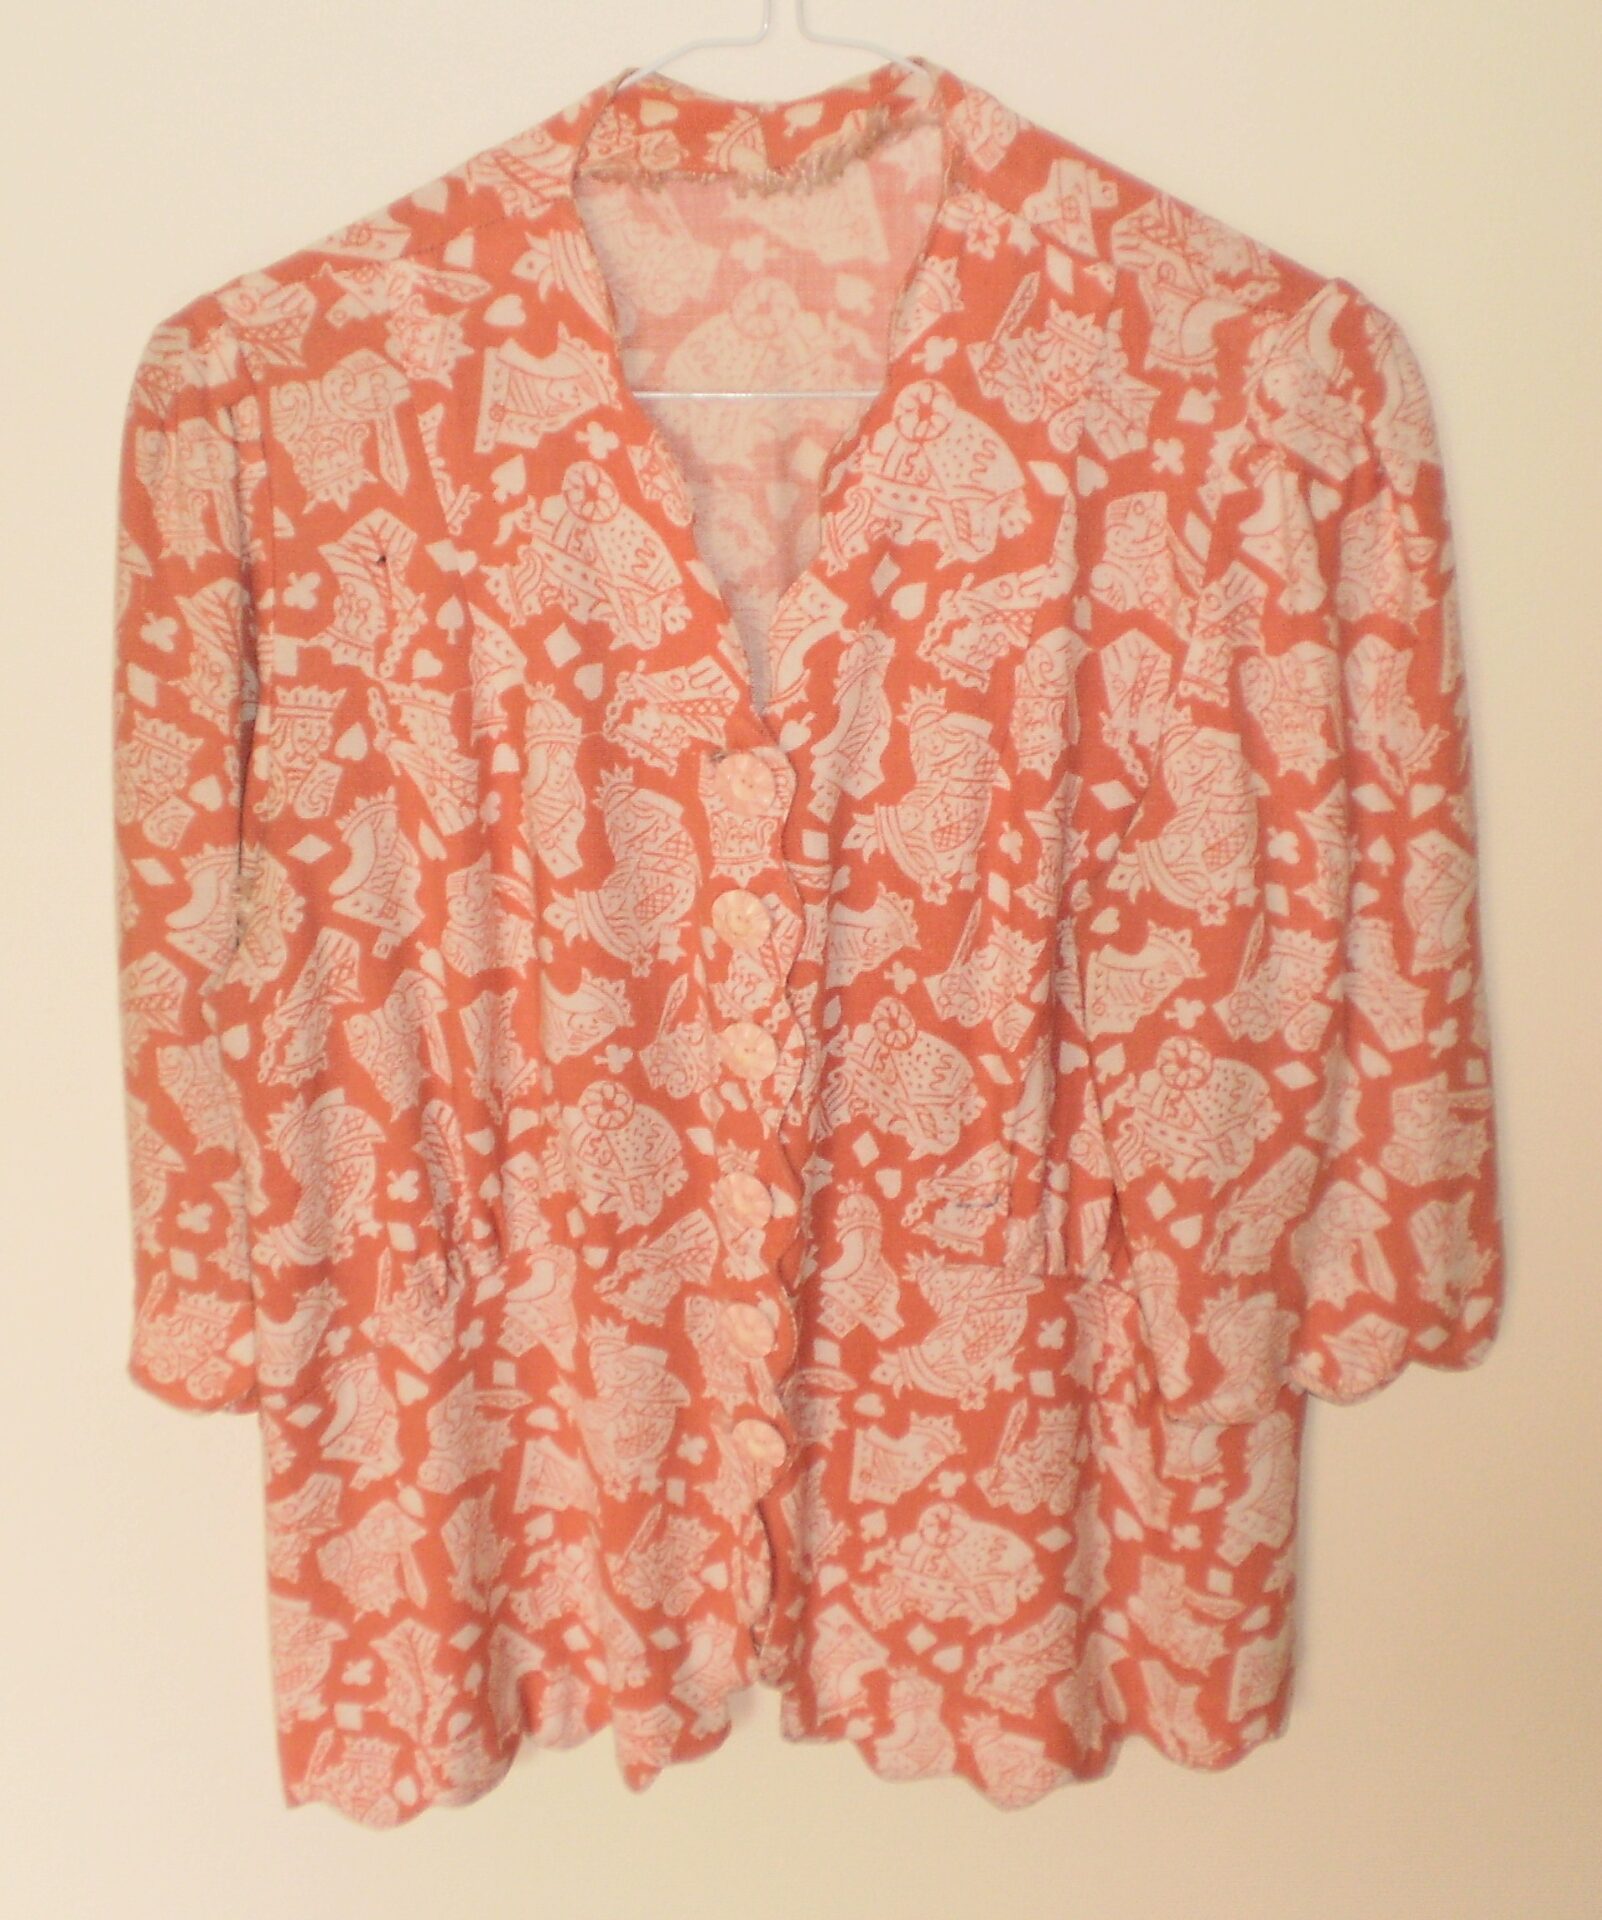 Blouse with a card motif design